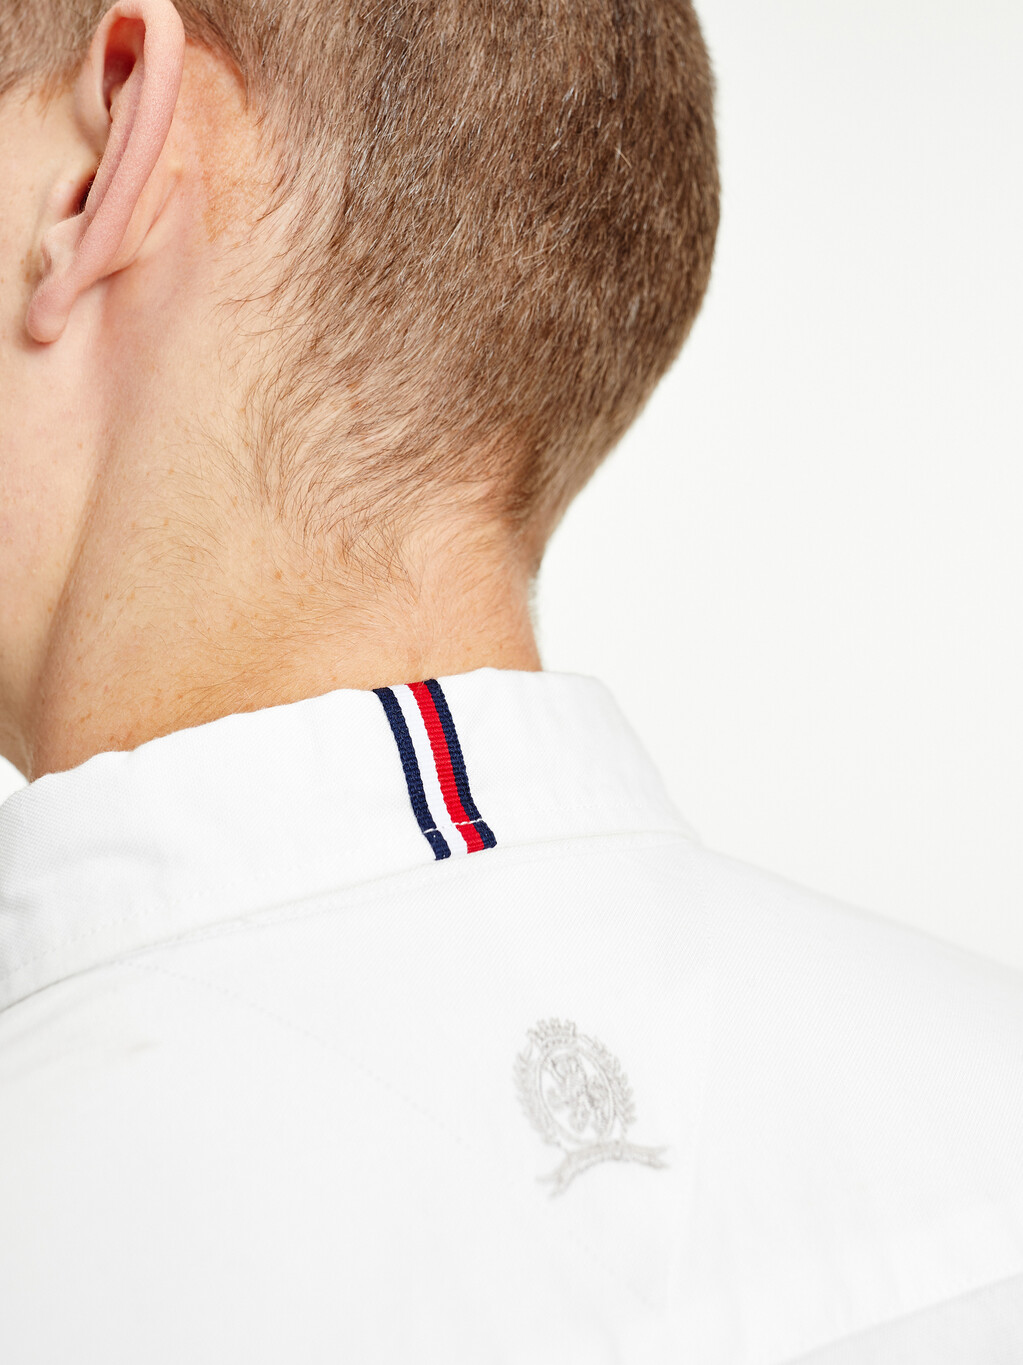 Icons Crest Embroidery Regular Fit Shirt